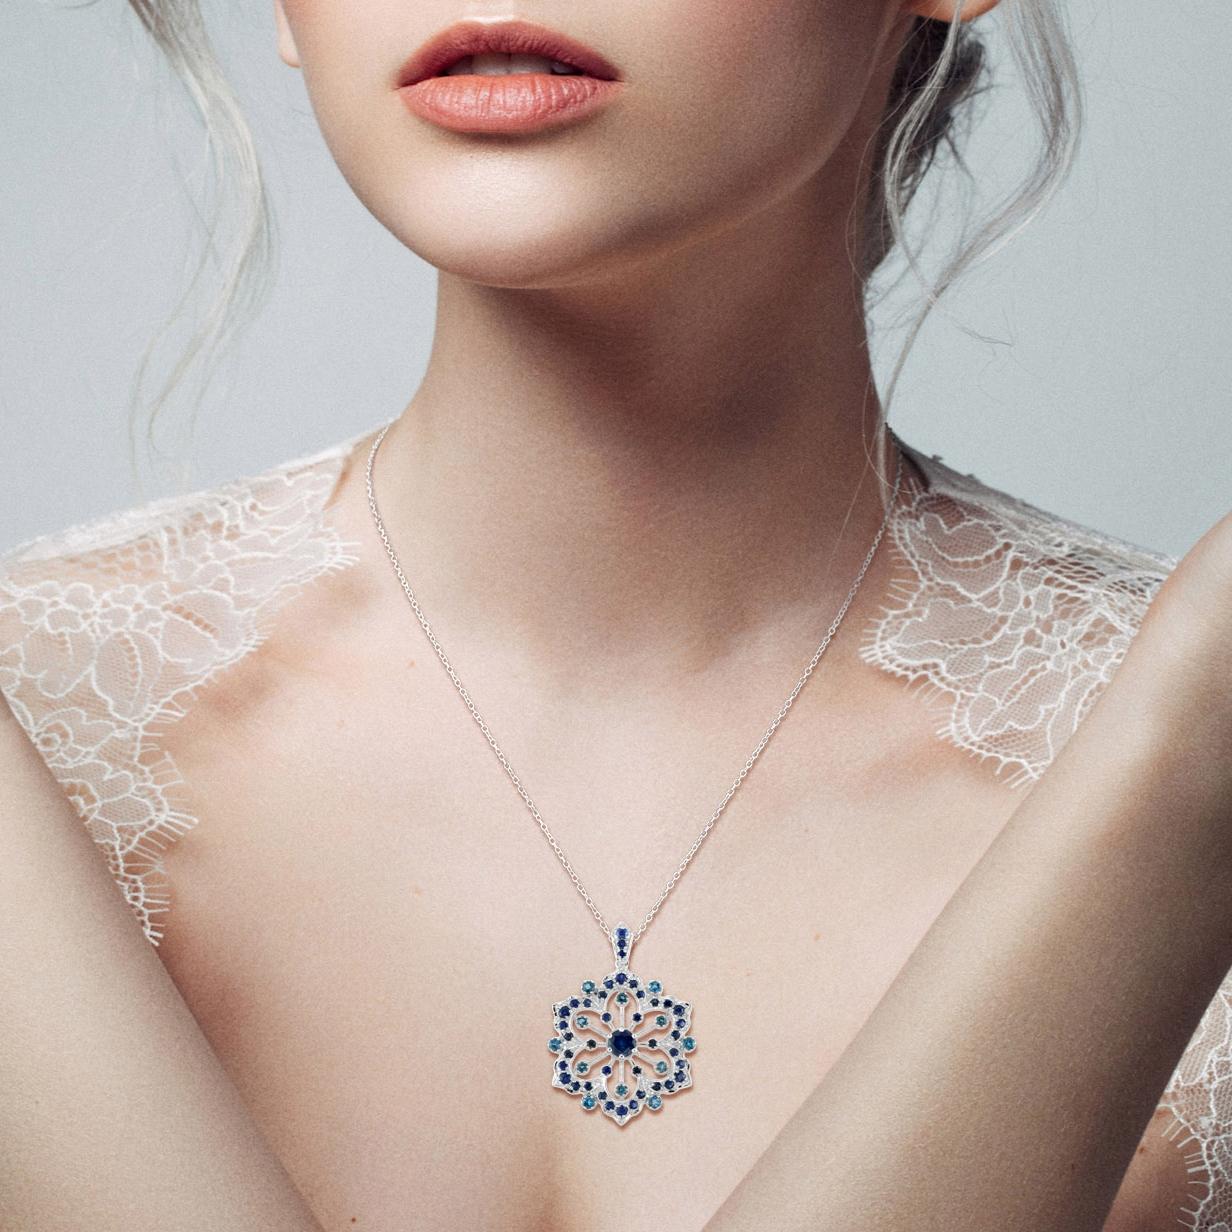 Add the perfect touch to your look with the Fleur Belle Filigree Flower Pendant. An instant eye-catcher, it sports a lovely pendant with intricate details that instantly upgrade any outfit. The blue sapphires and London blue topaz in white gold